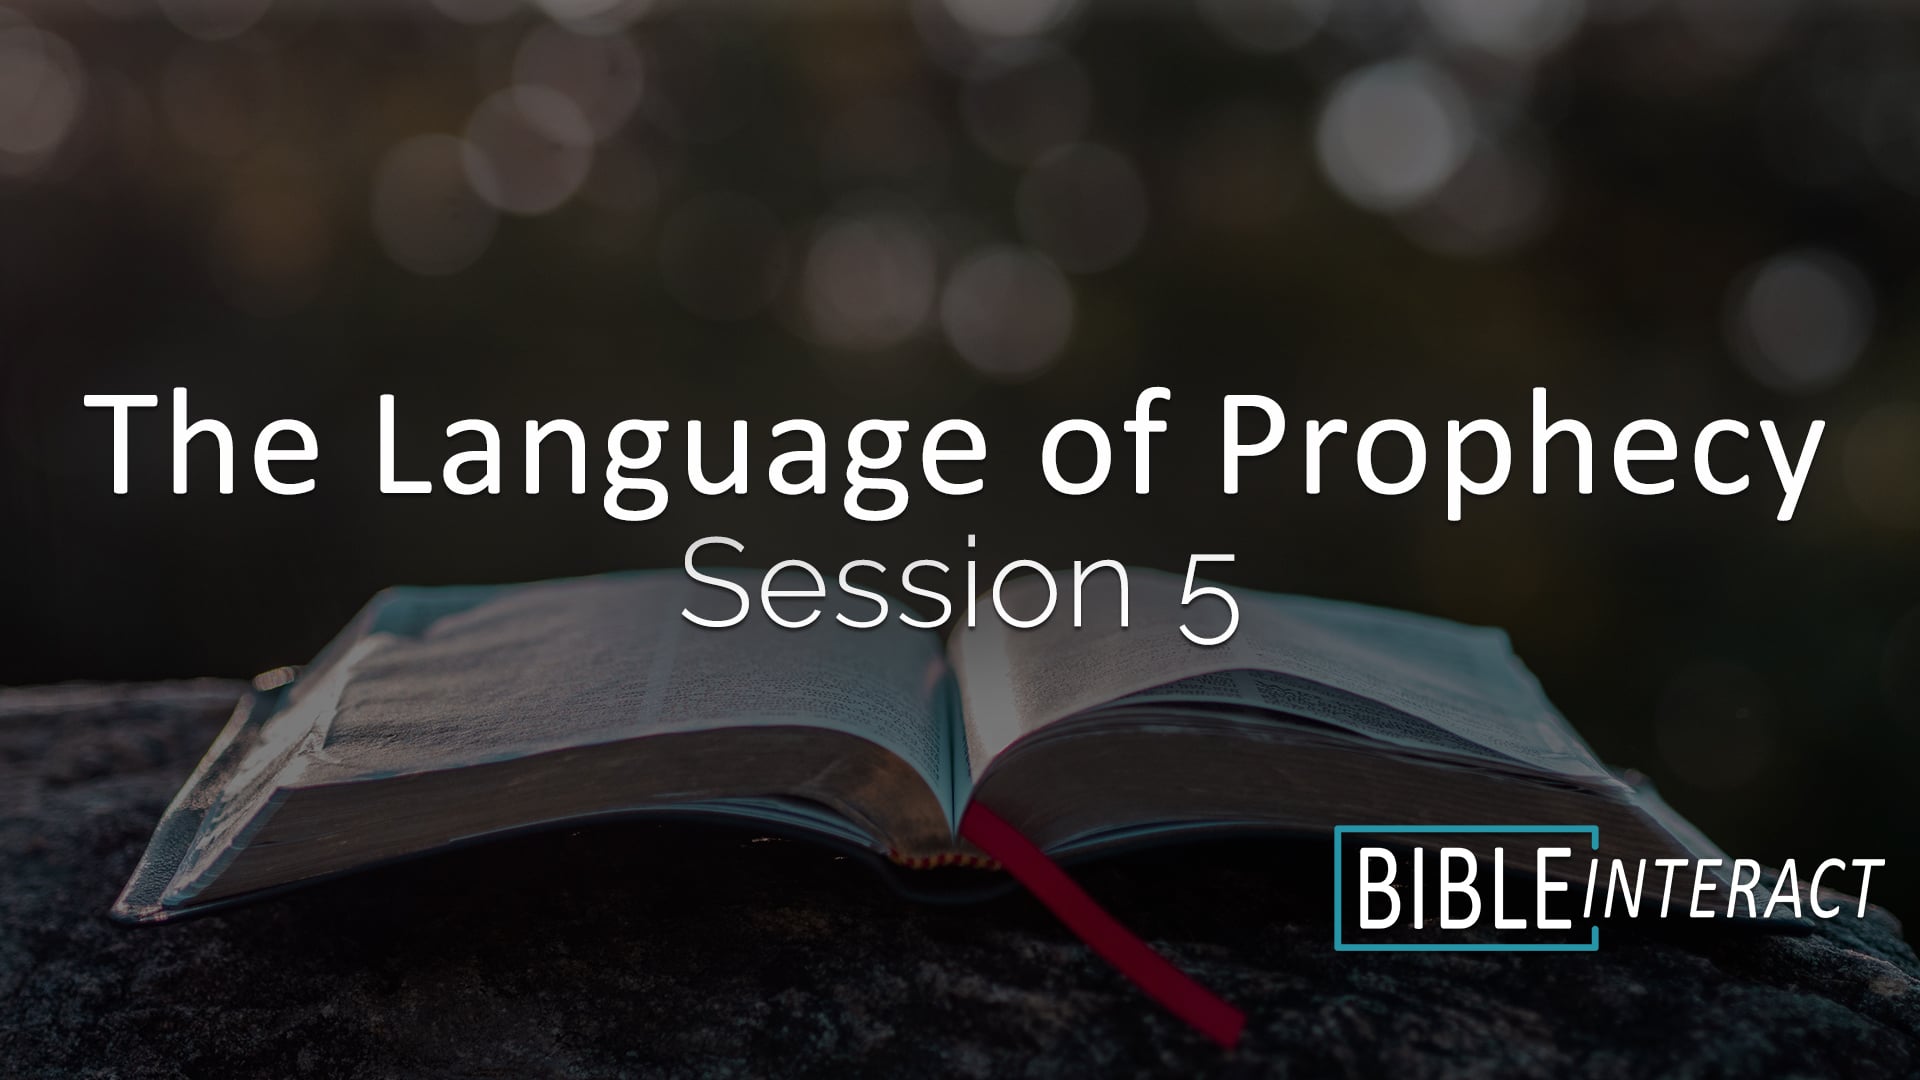 The Language of Prophecy Session 5